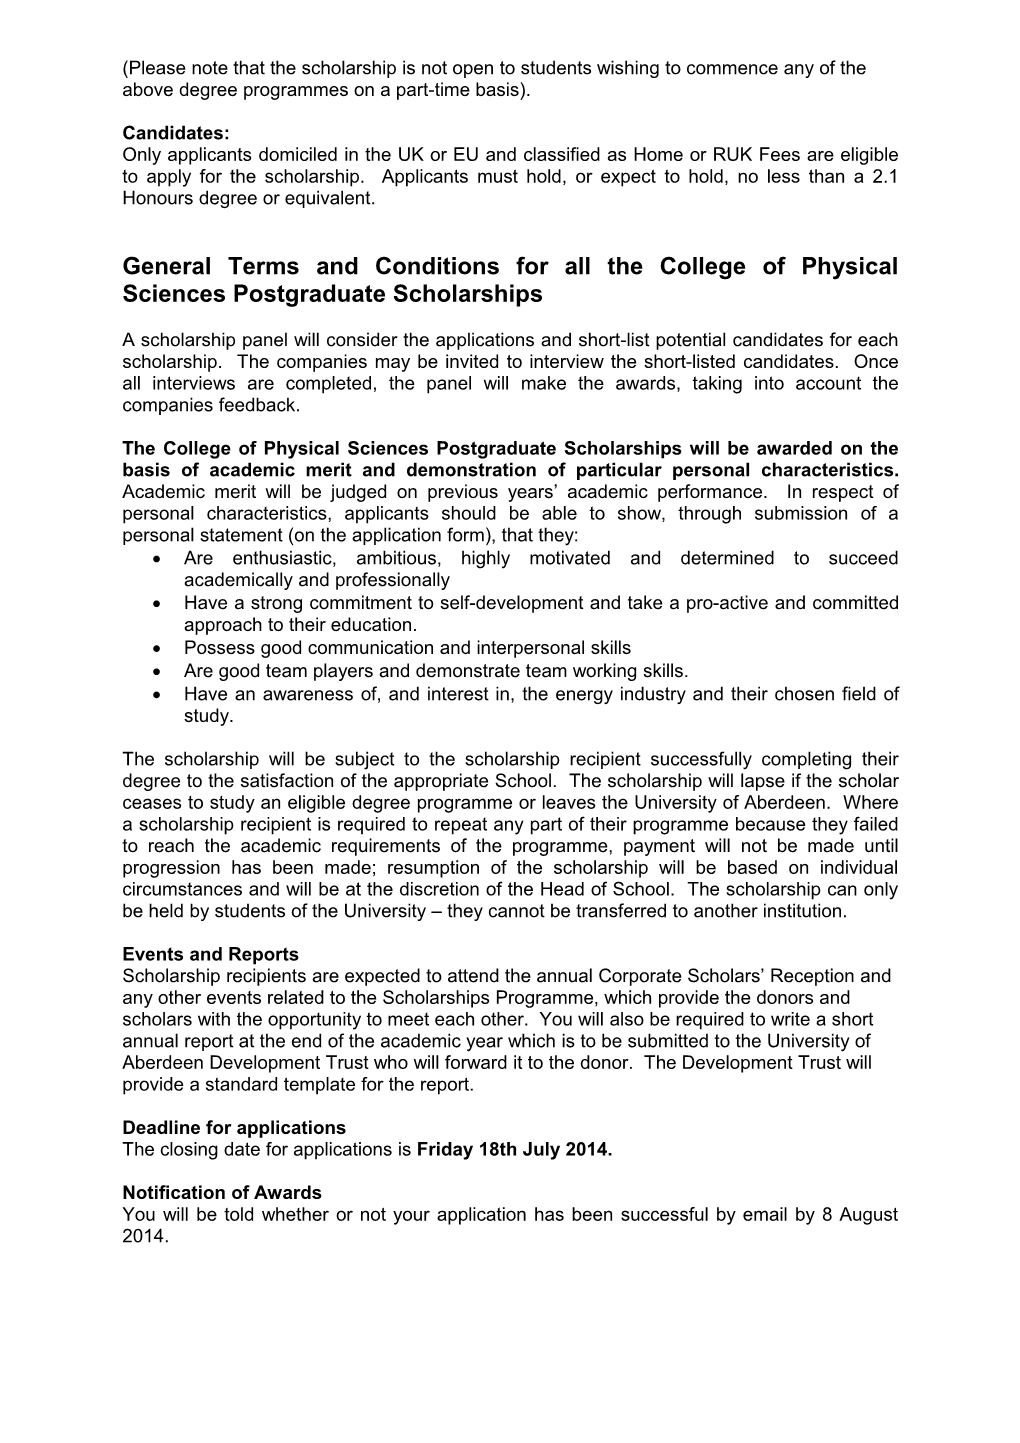 College of Physical Sciences Postgraduatescholarships for Students Commencing Postgraduate